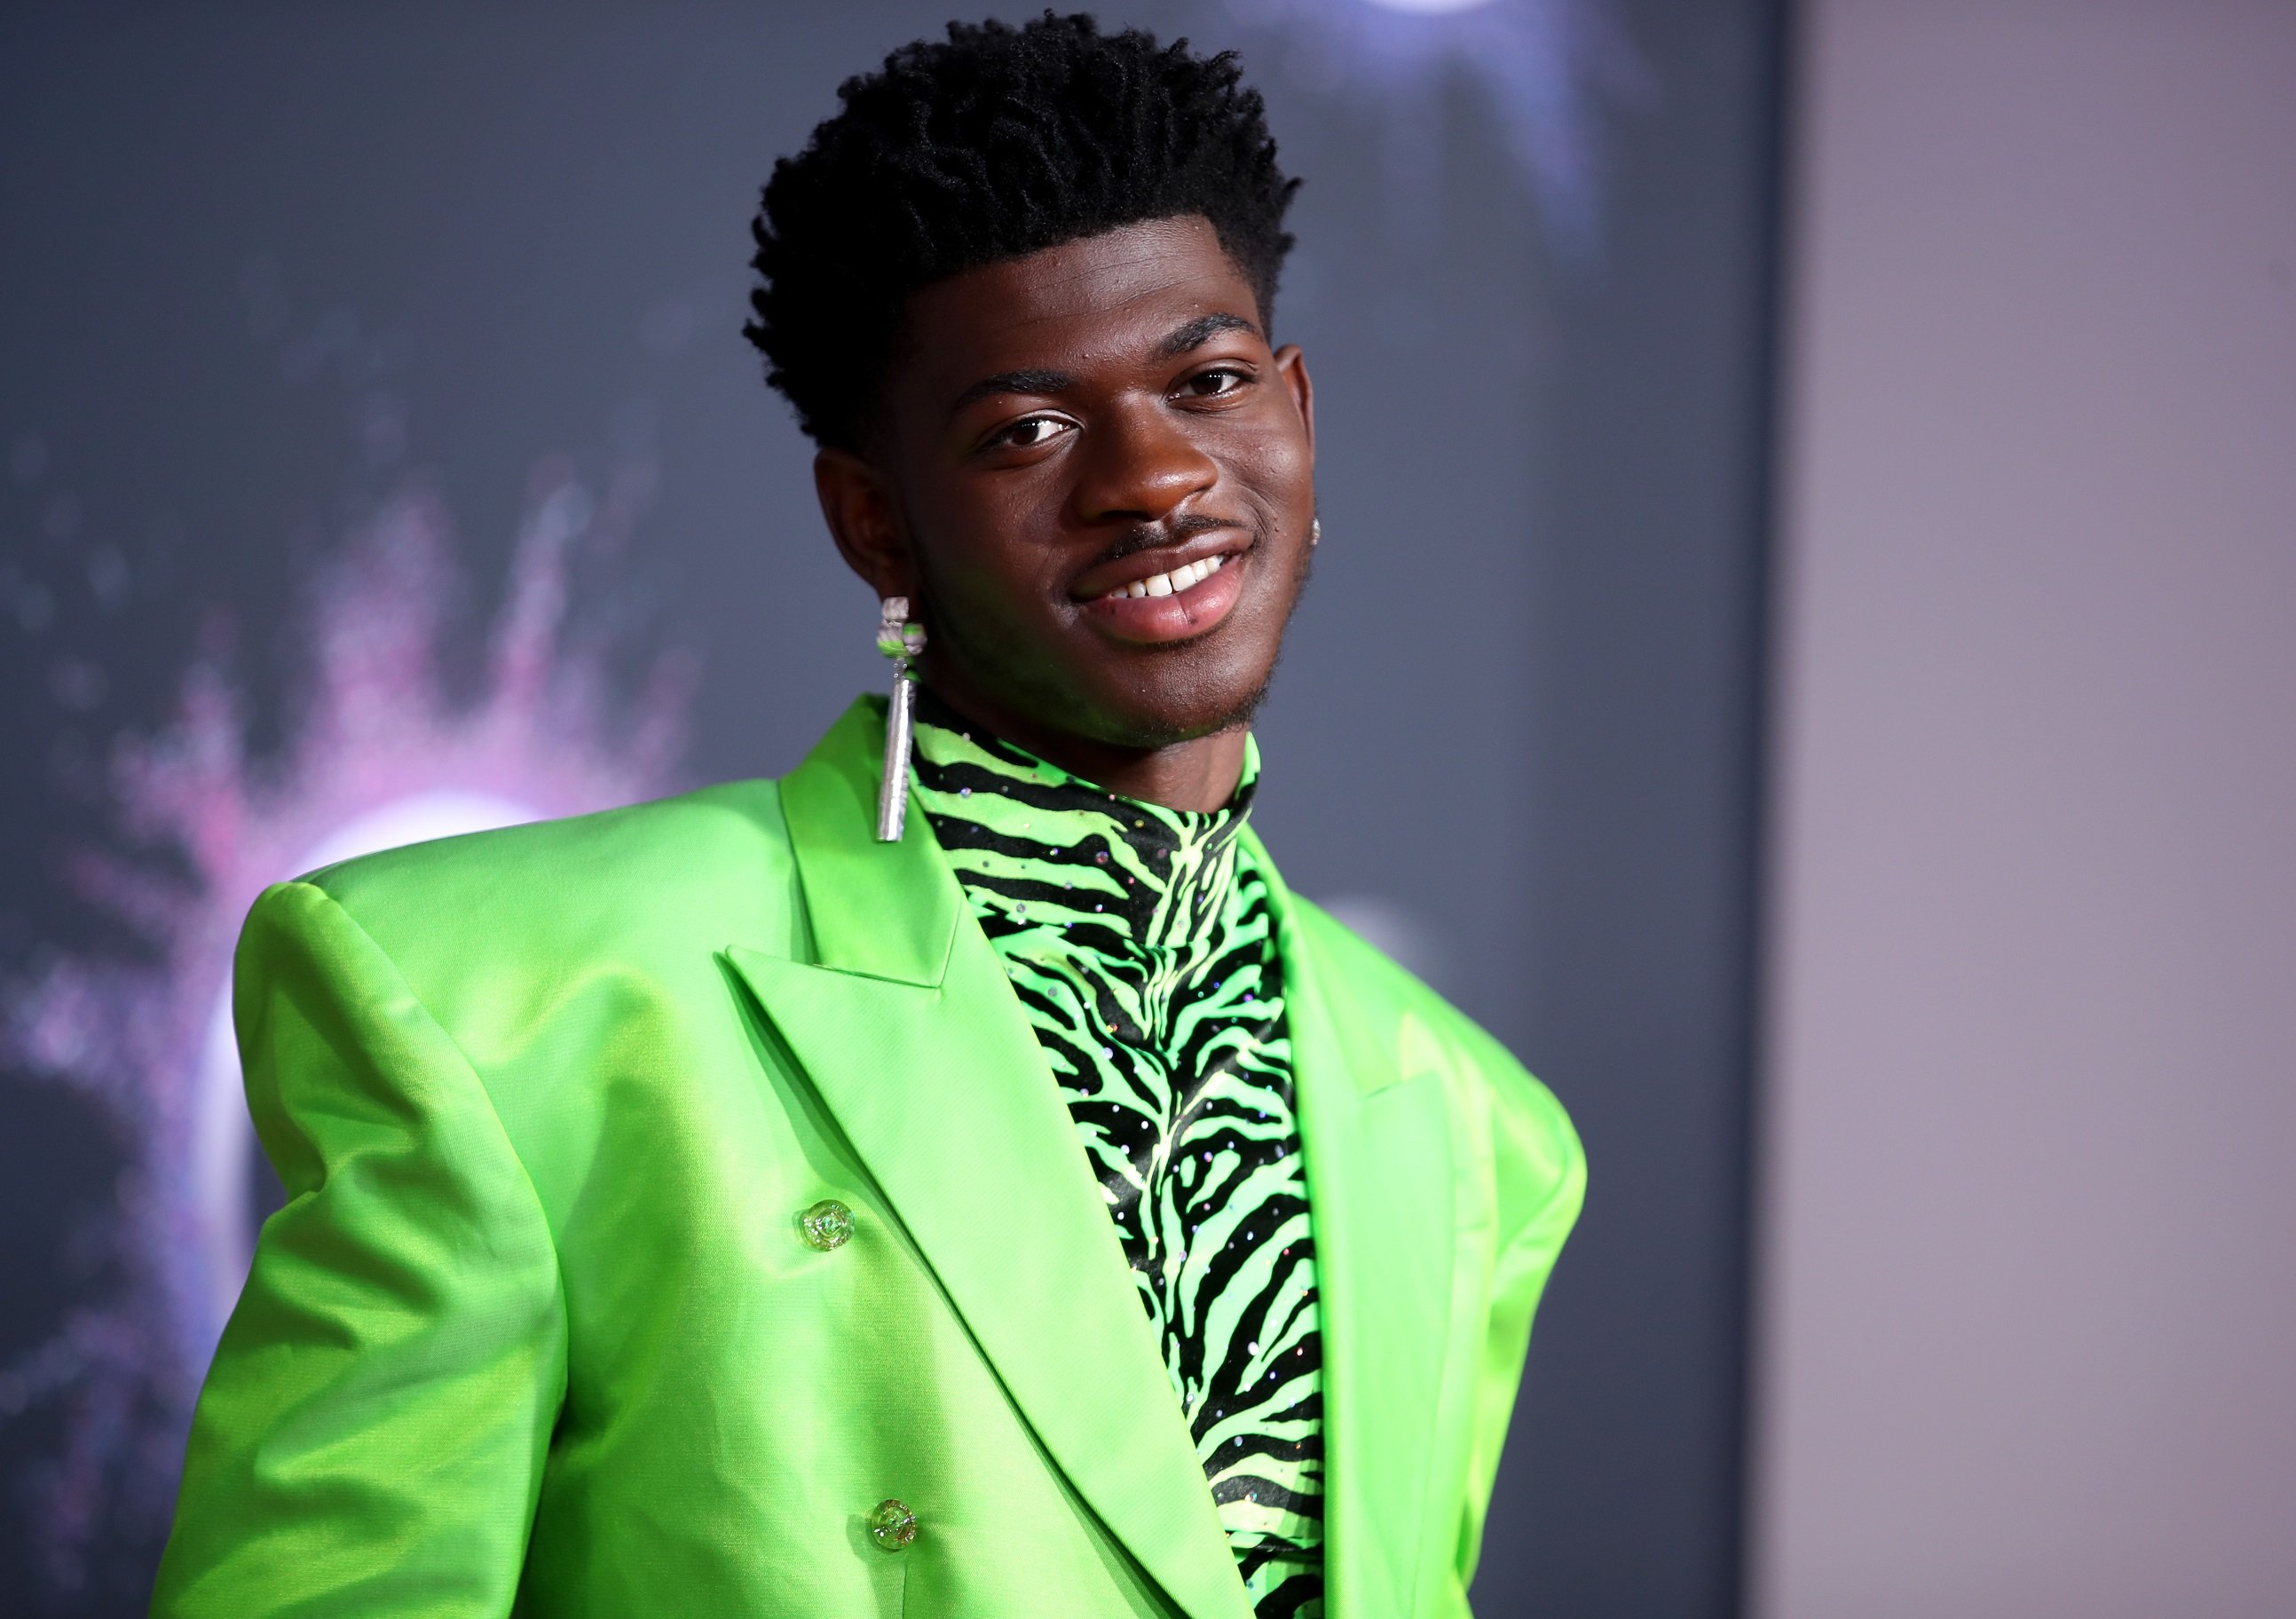 Lil Nas X wearing a green suit